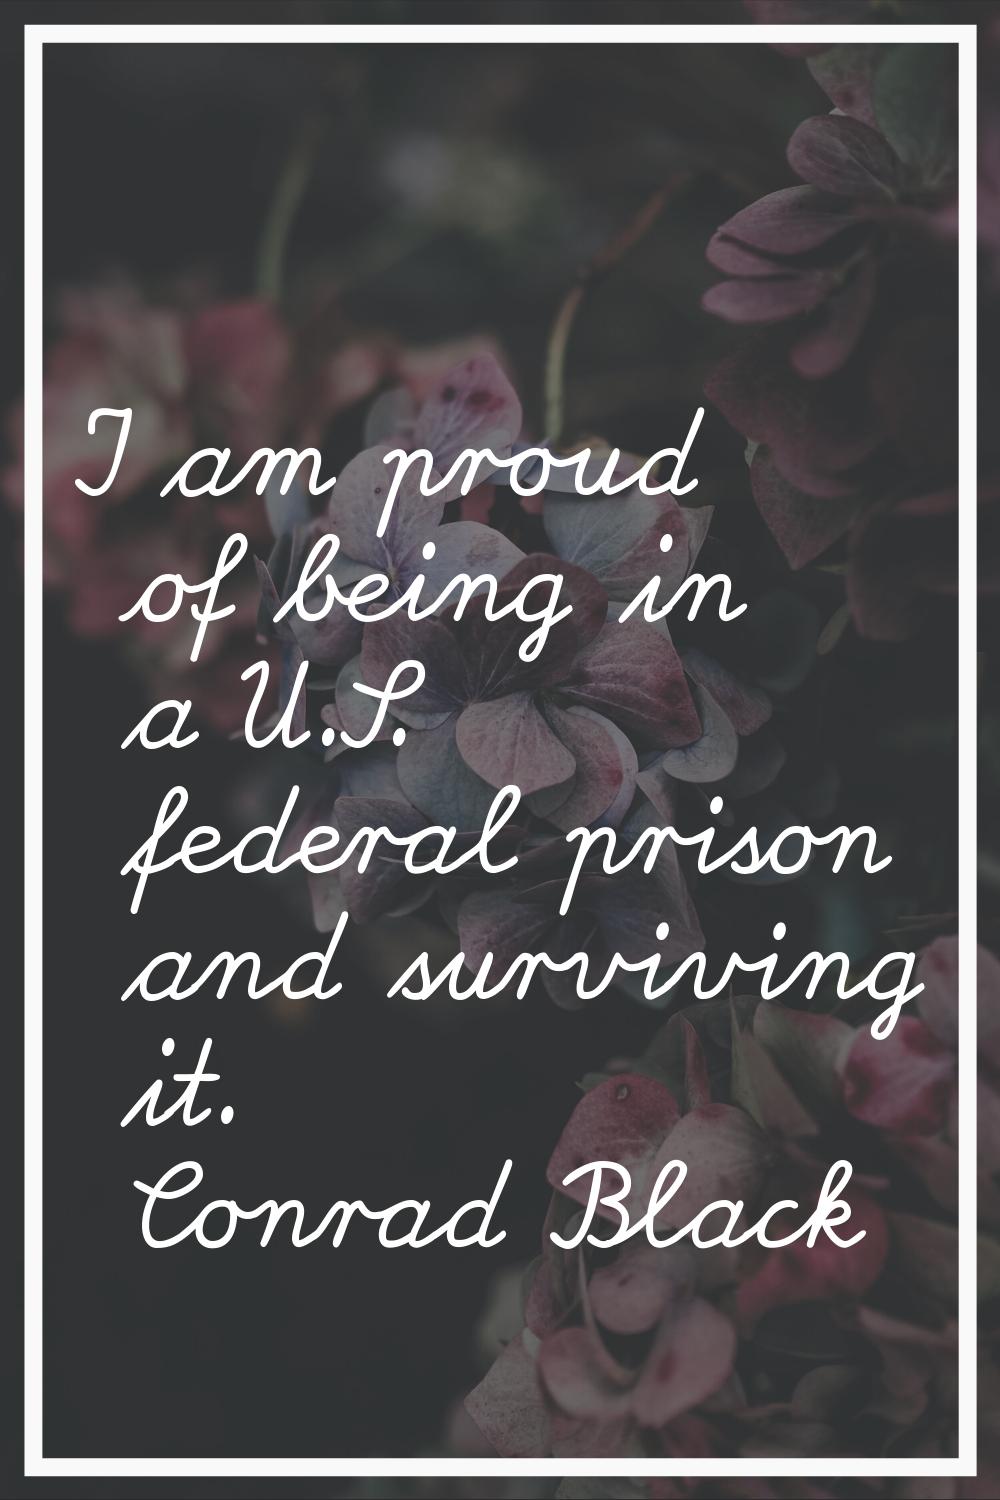 I am proud of being in a U.S. federal prison and surviving it.